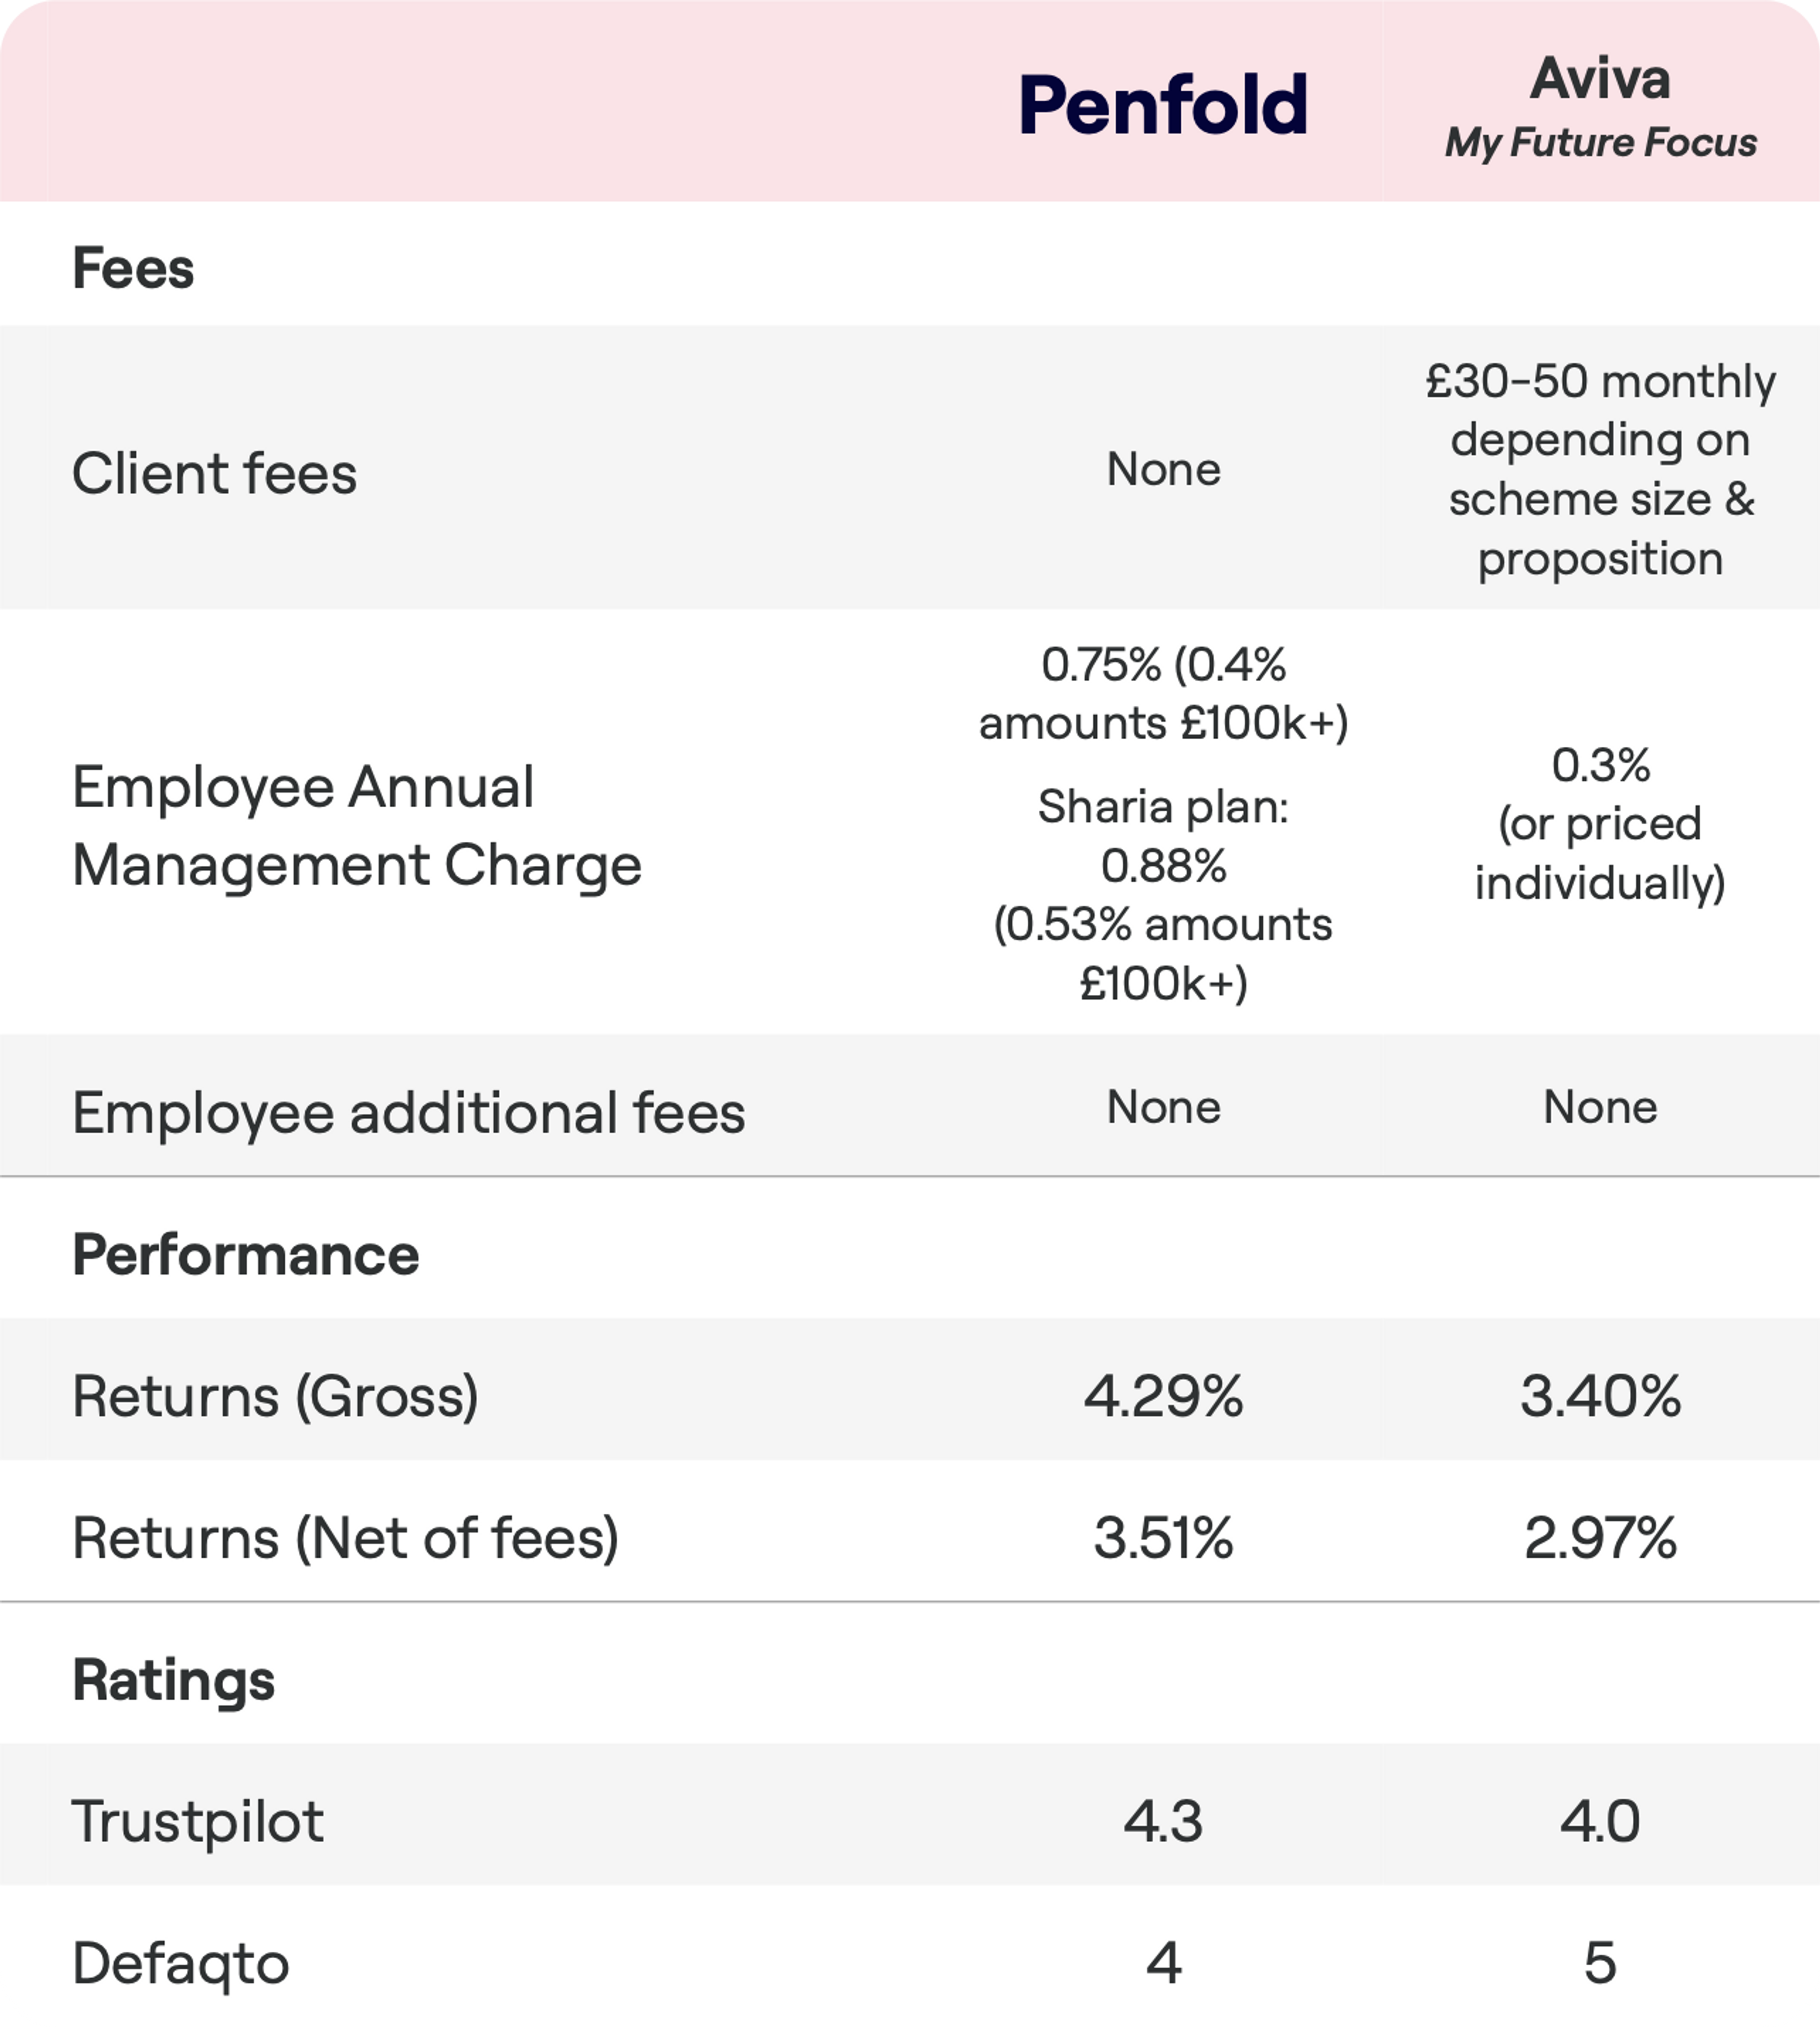 A fee and performance comparison chart between Penfold and Aviva's My Future Focus. Penfold has no client fees, an Employee Annual Management Charge of 0.75% (reducing to 0.4% for amounts over £100k), and for the Sharia plan, 0.88% (reducing to 0.53% for over £100k). Aviva charges £30-50 monthly depending on scheme size and proposition, with a 0.3% Employee Annual Management Charge (or priced individually). Both have no additional employee fees. Penfold shows a gross return of 4.29% and a net return of 3.51%. Aviva has a lower gross return of 3.40% and net return of 2.97%. Trustpilot rates Penfold at 4.3 and Aviva at 4.0, while Defaqto rates Penfold 4 stars and Aviva 5 stars.